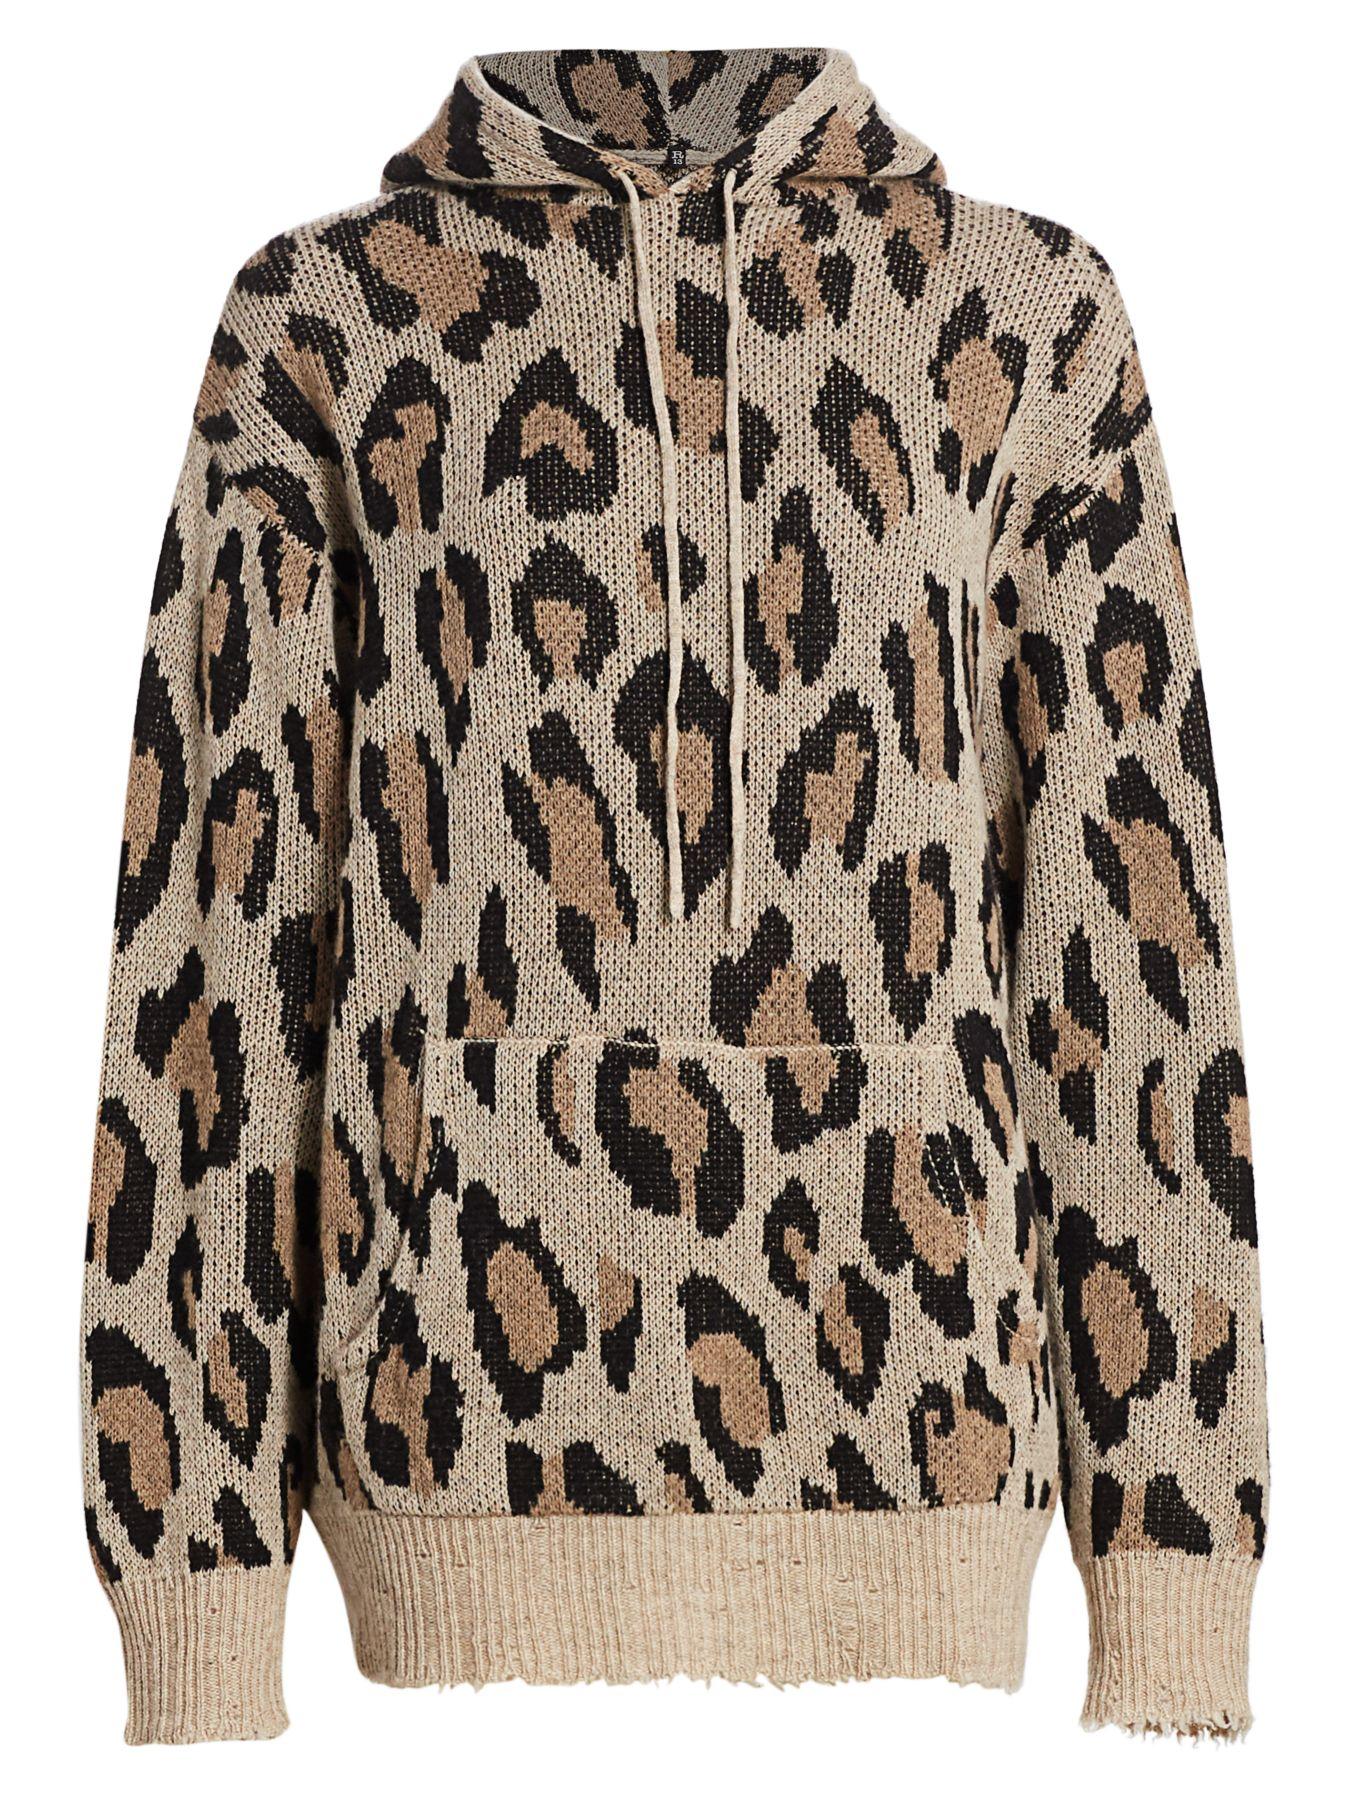 R13 Cashmere Leopard Print Hooded Sweater - Save 38% - Lyst